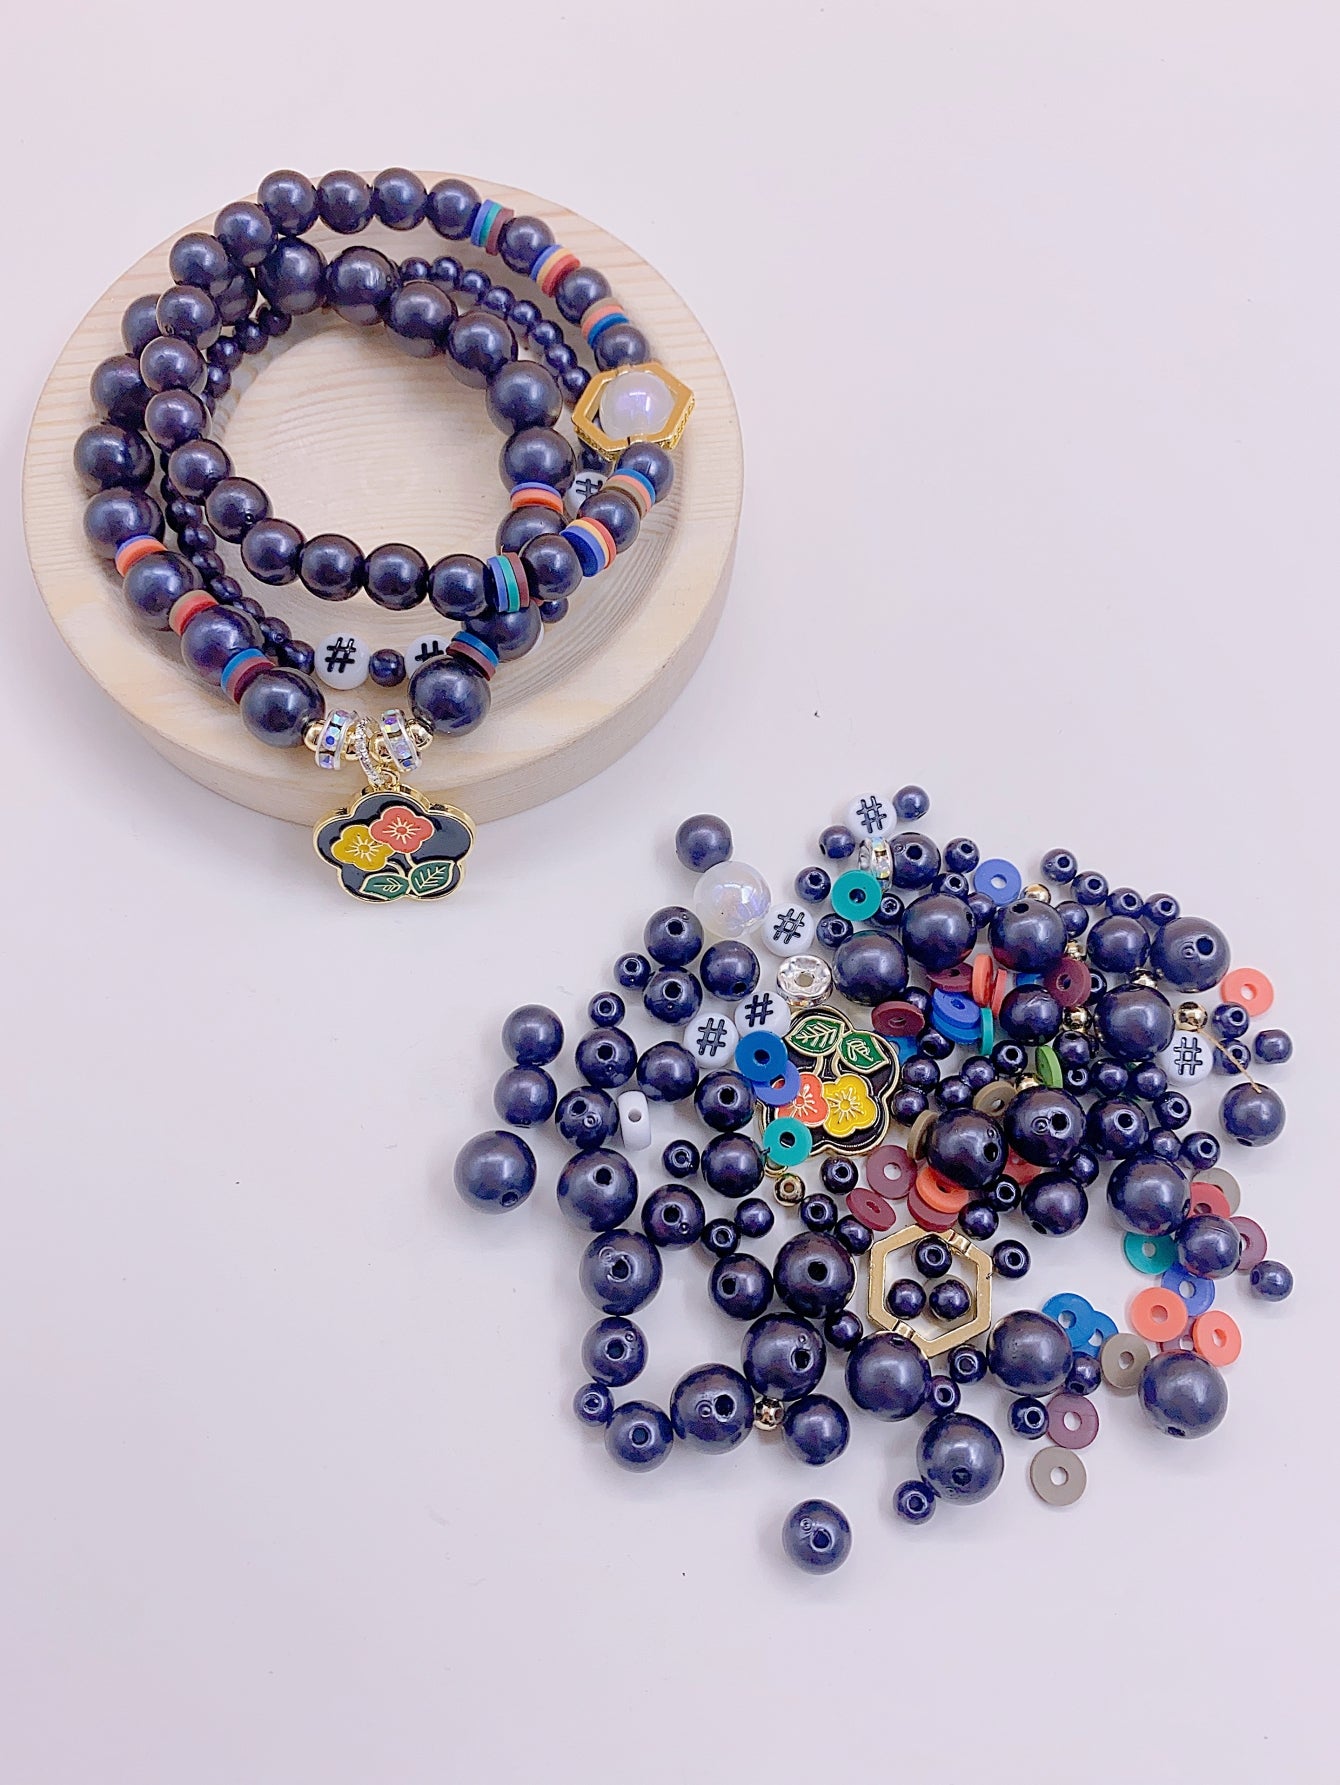 DIY can do finished ABS loose beads diy handmade bracelet necklace hair hair earrings accessories material bag